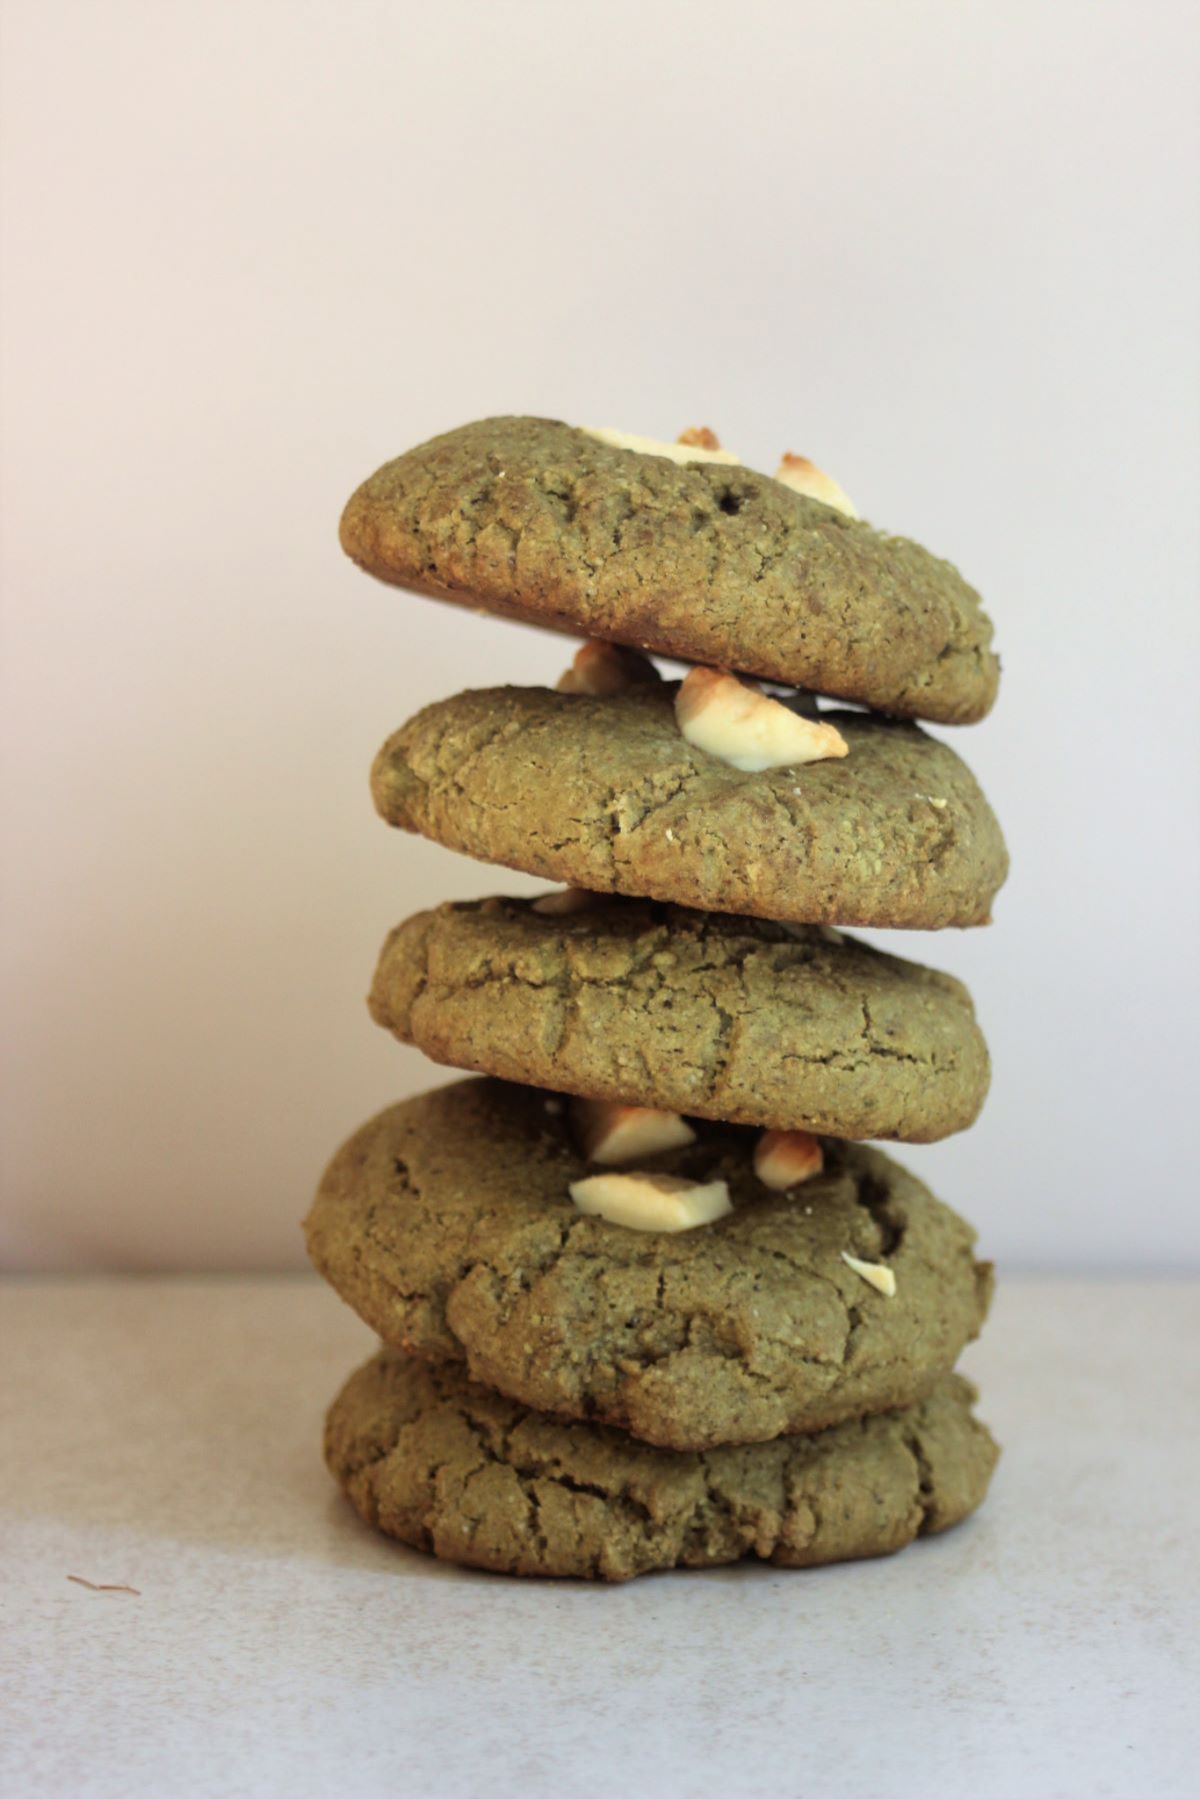 A tower of matcha cookies with white chocolate chunks.